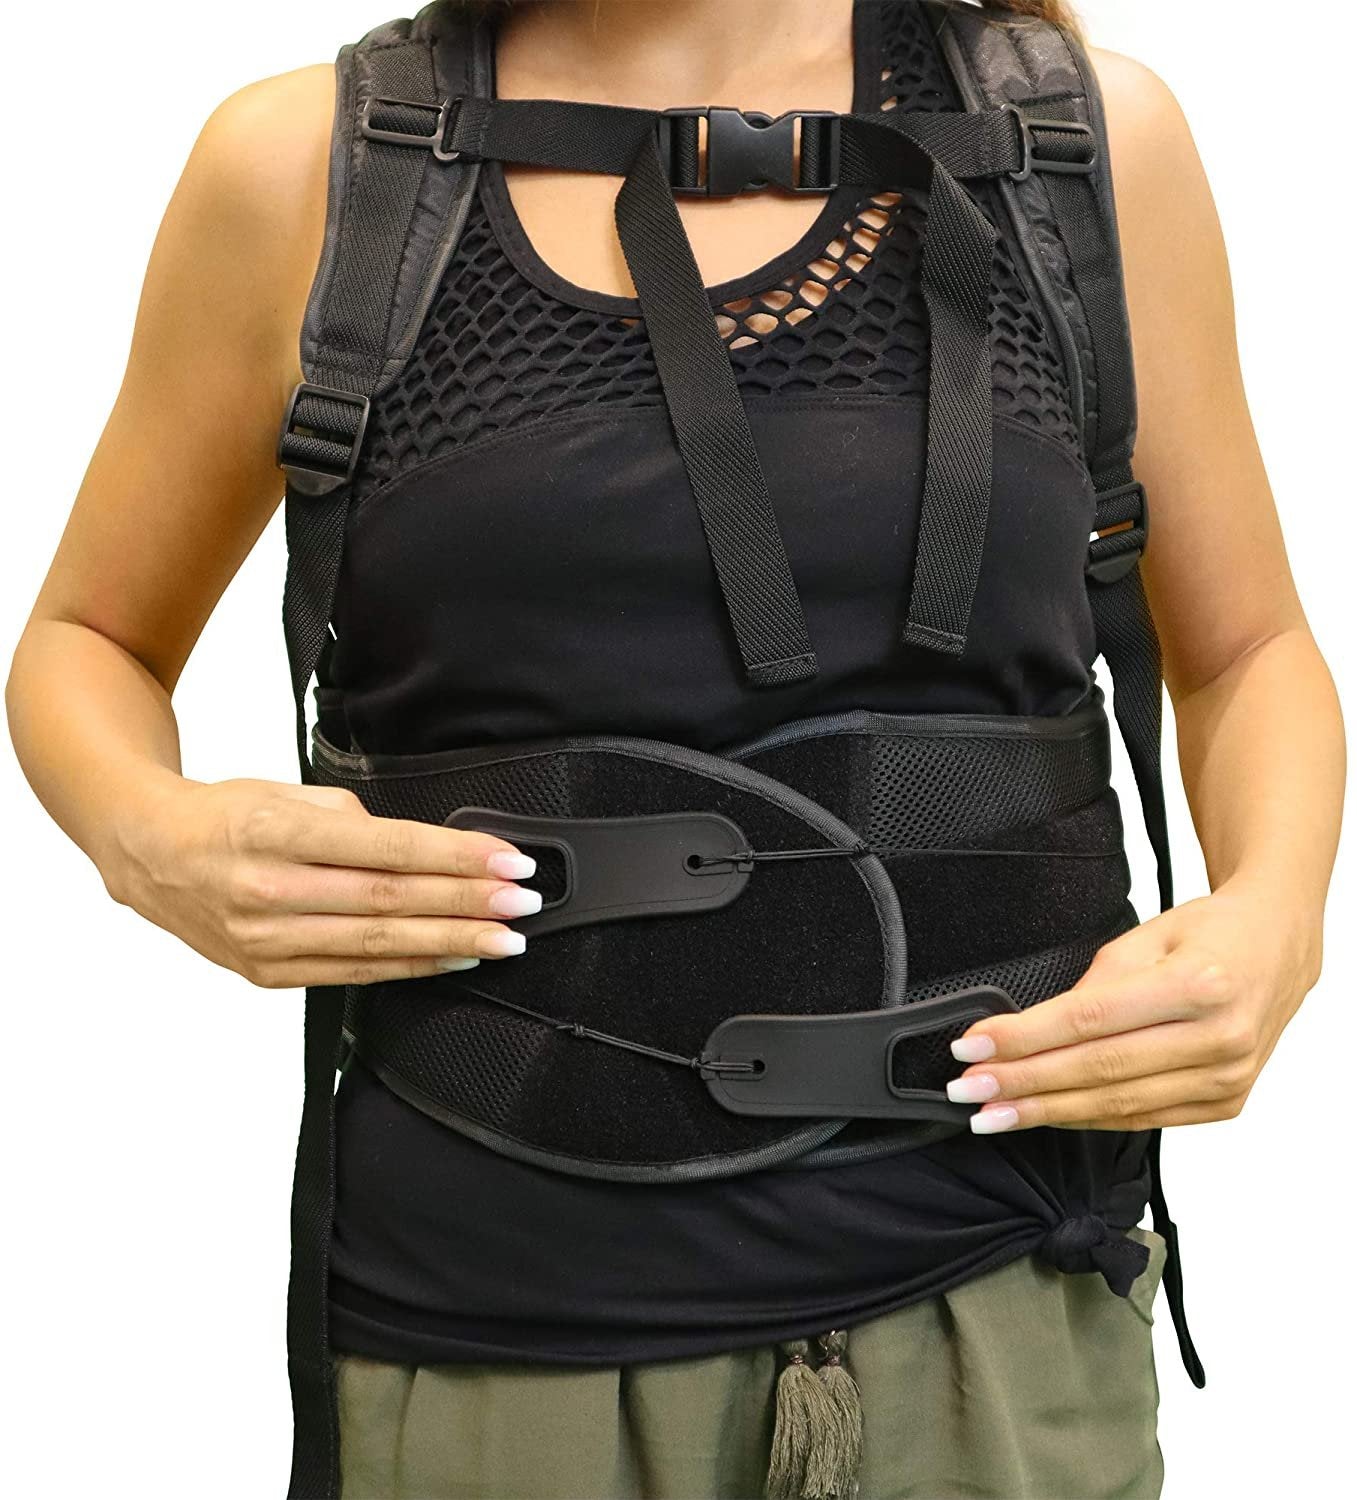 TLSO Thoracic Full Back Brace - PDAC Pain Relief and Straightener for  Fractures, Post Op, Herniated Disc, Spinal Trauma, Mild Scoliosis by Brace  Align : : Health & Personal Care